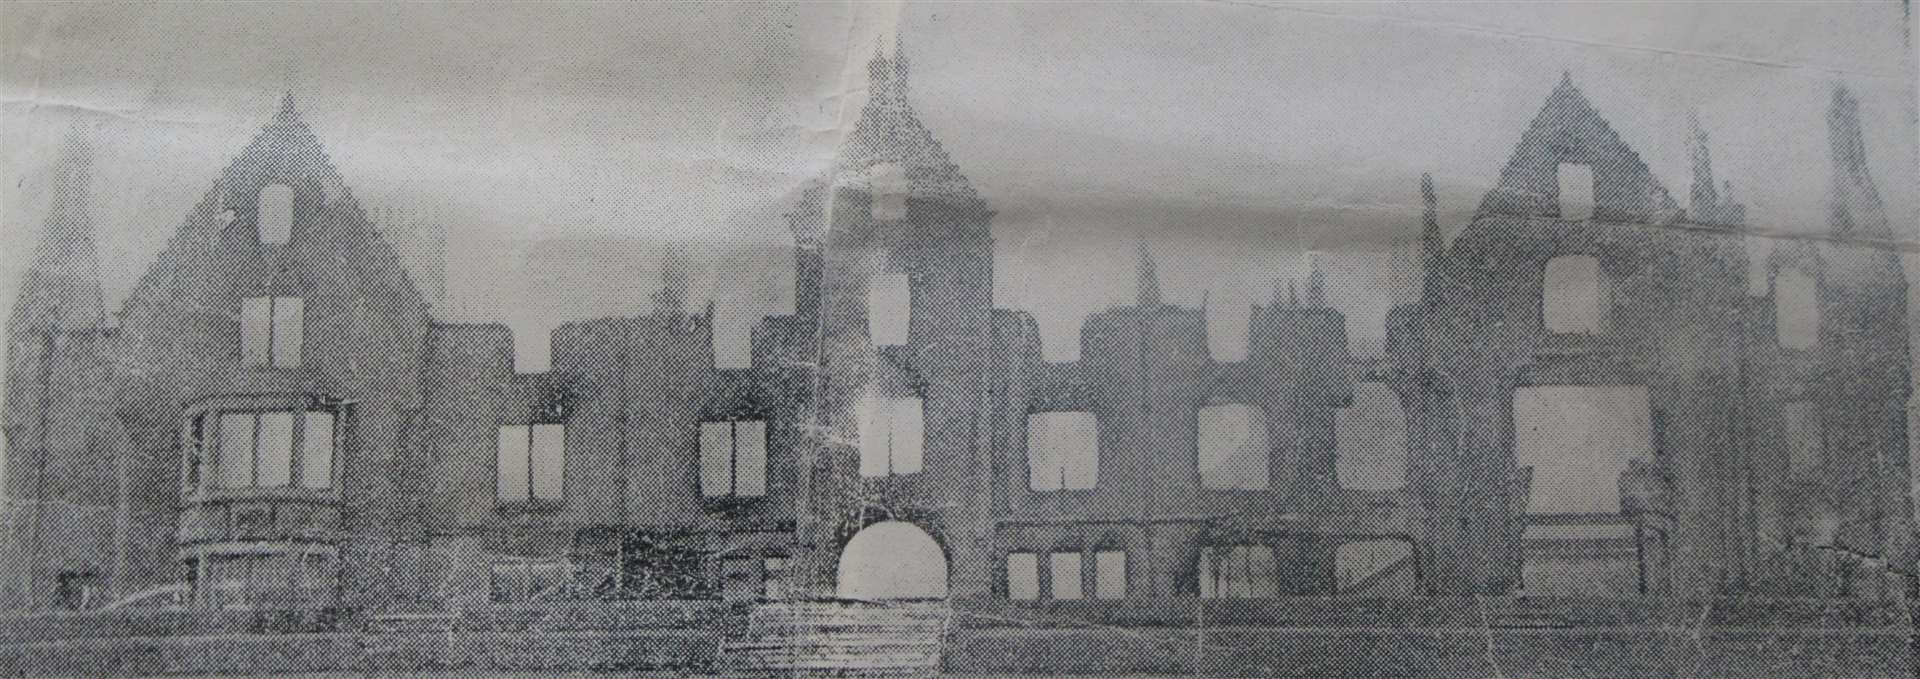 September 1950: Aviemore Hotel lies gutted after the inferno